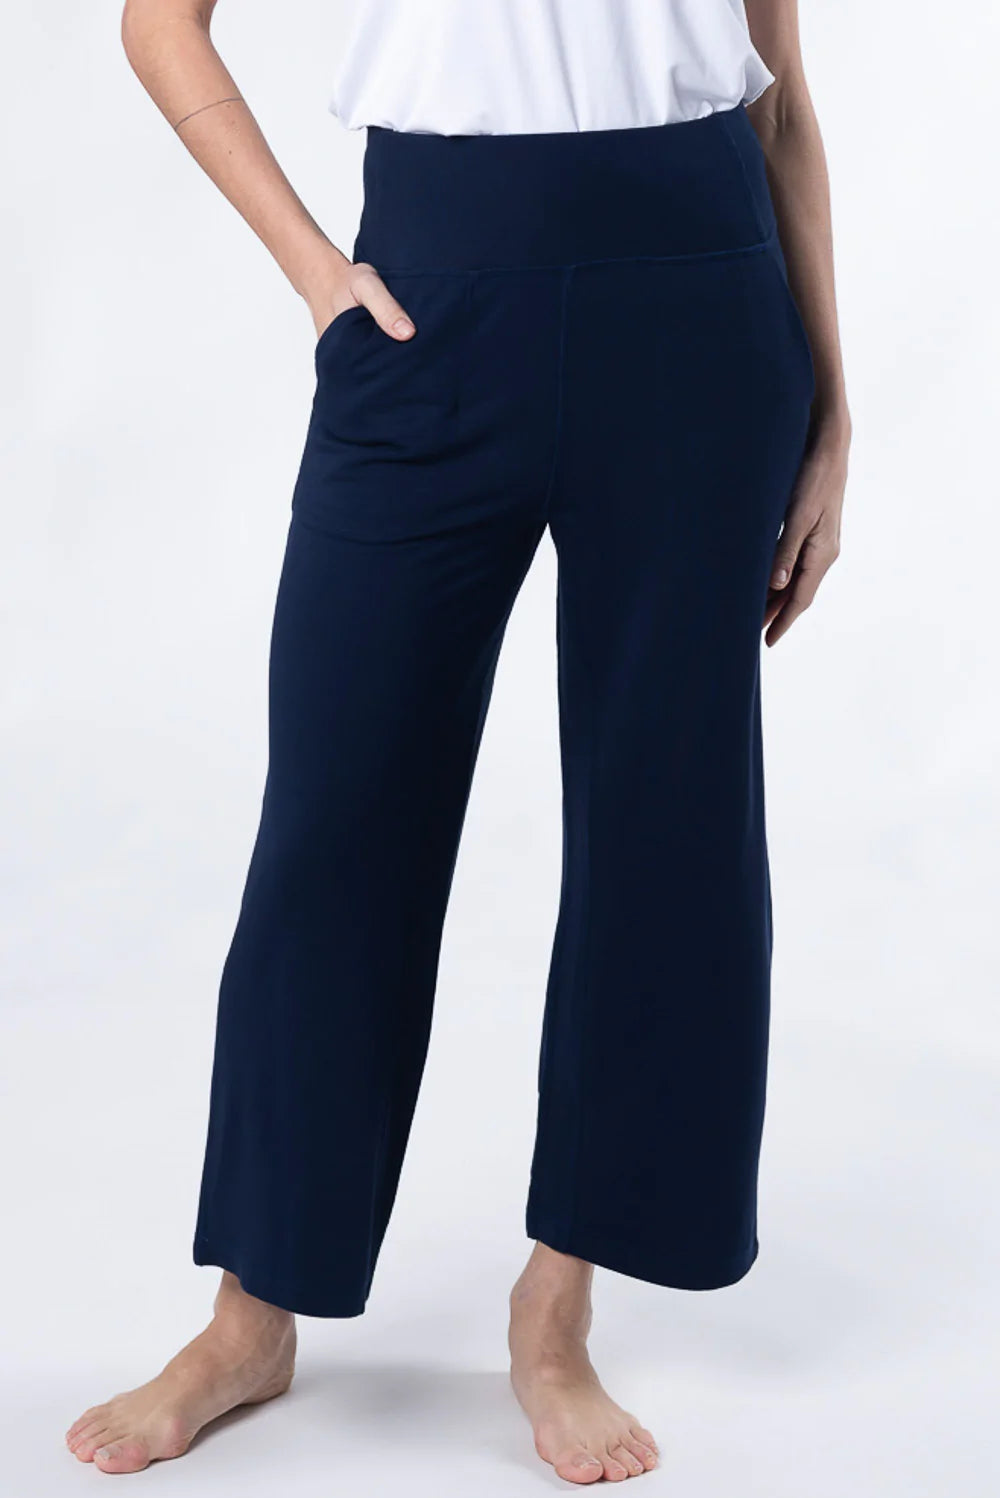 Terrera Dion Cropped Pant